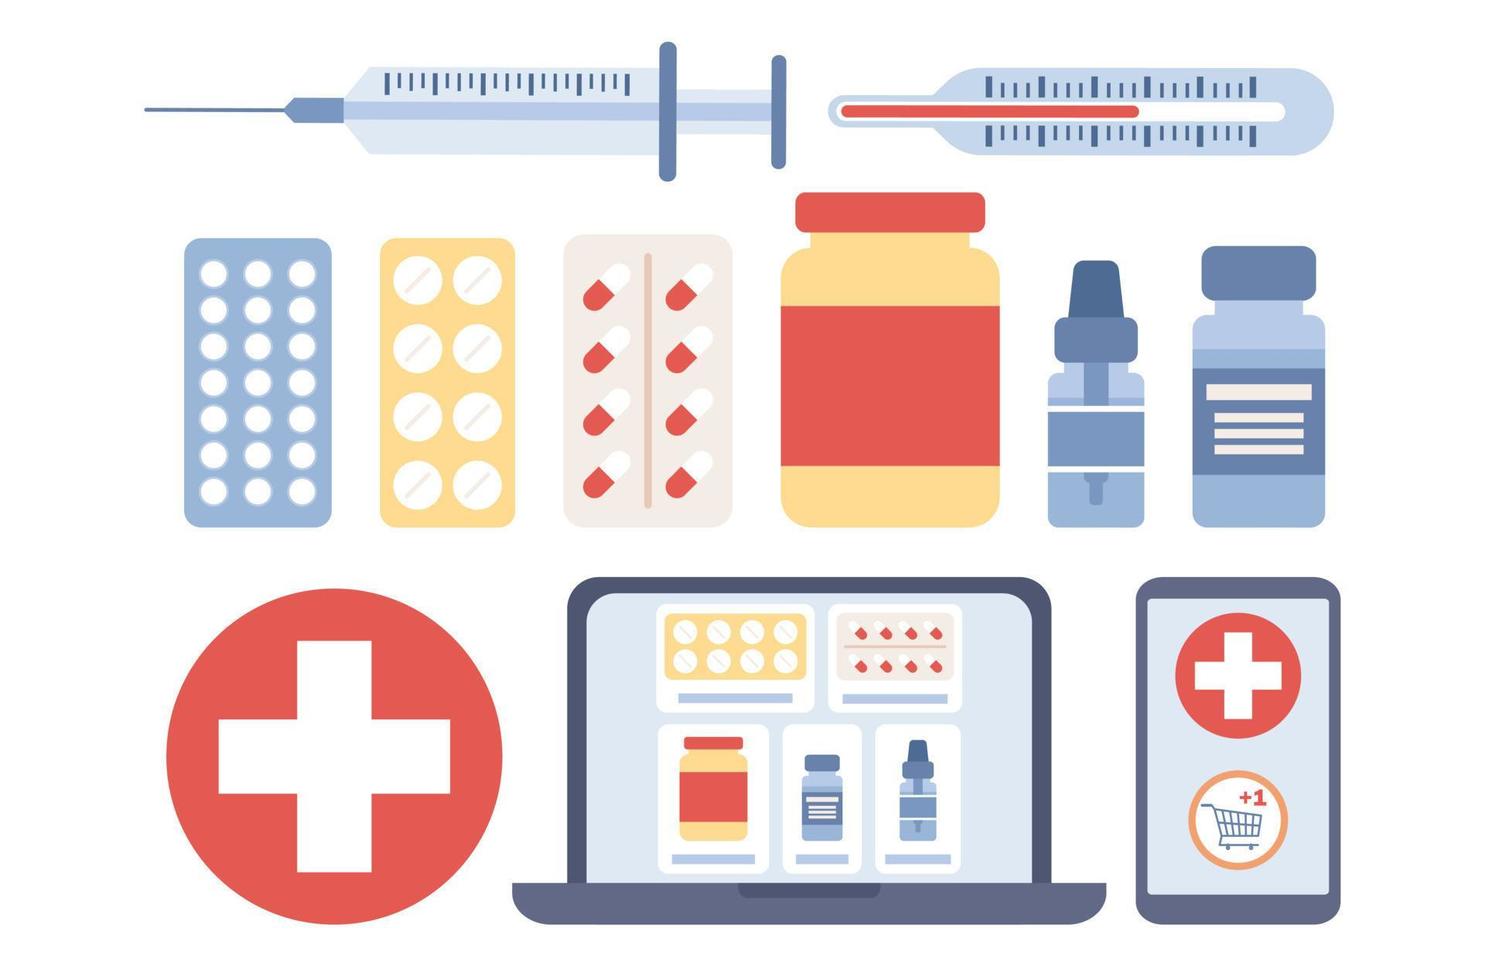 Online pharmacy icon set. Drugstore services in smartphone app, web site. Medical supplies, bottles, liquids, pills, thermometer, syringe. Medicine chest. Health Care concept. Vector flat illustration